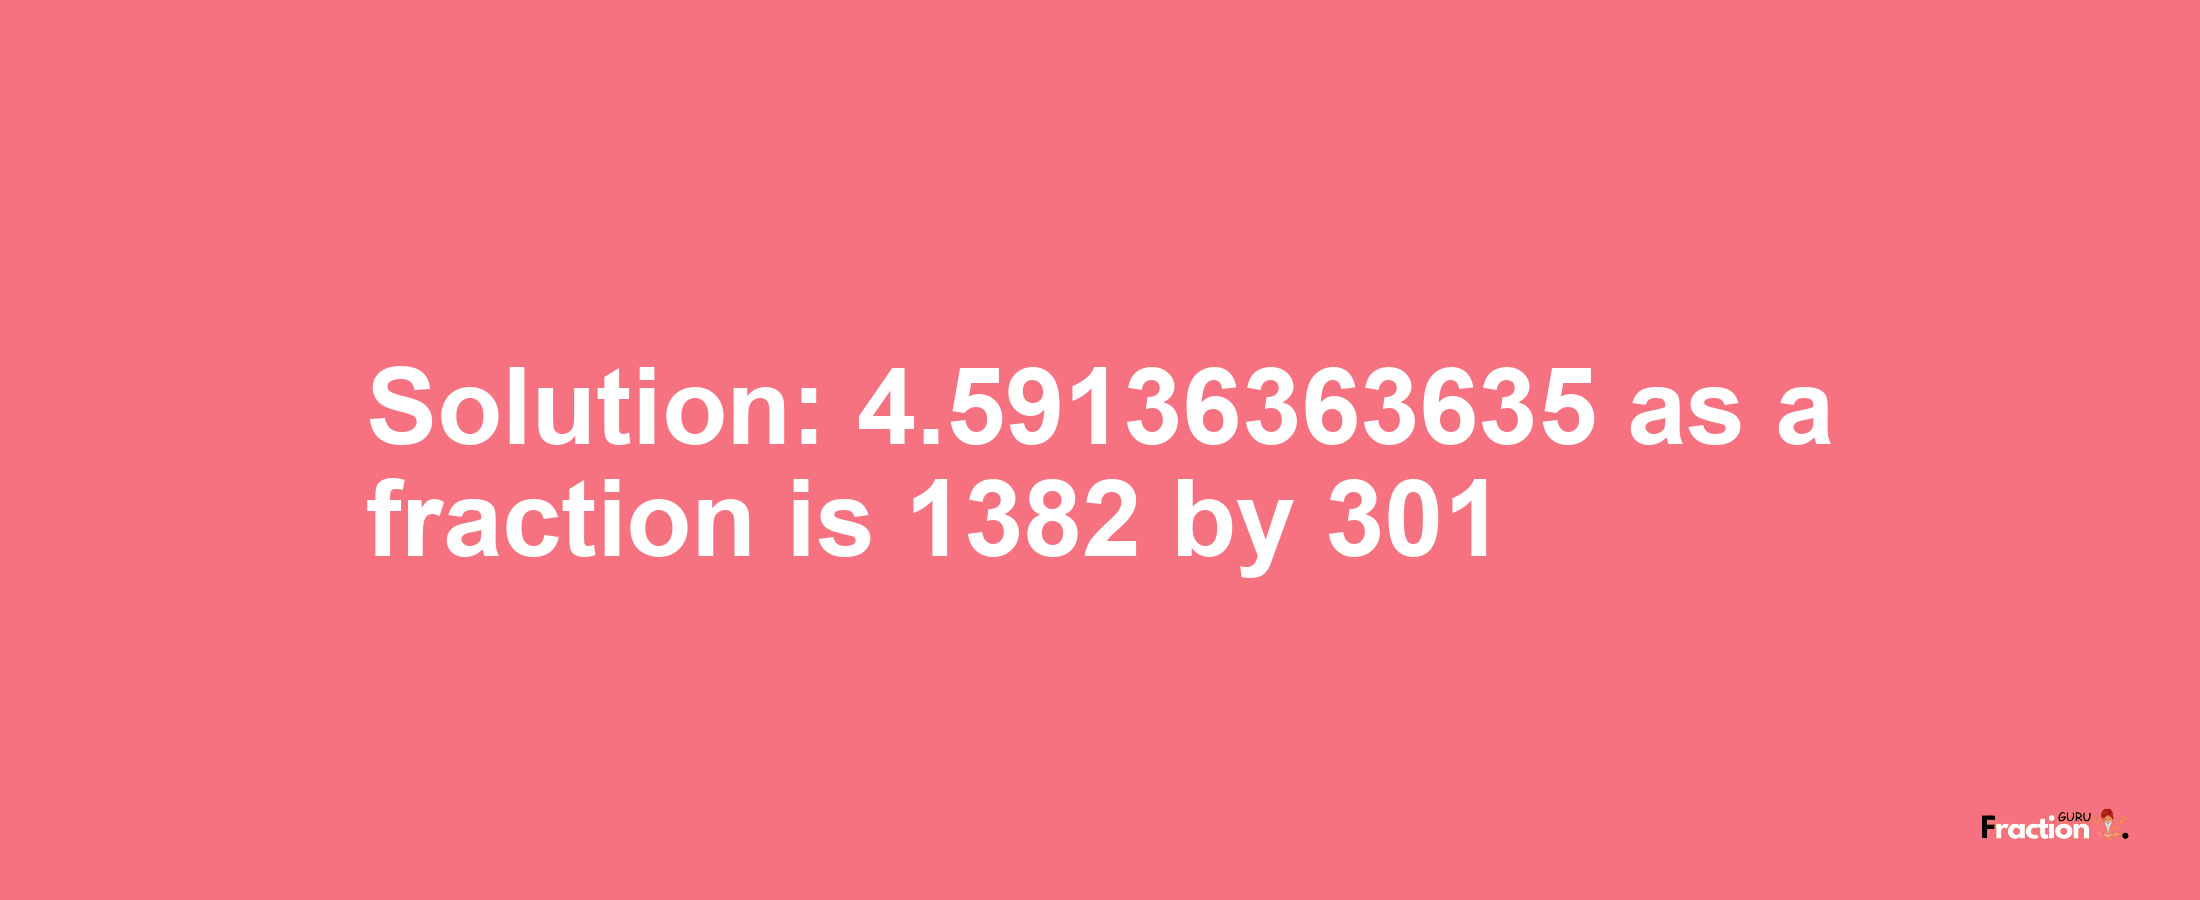 Solution:4.59136363635 as a fraction is 1382/301